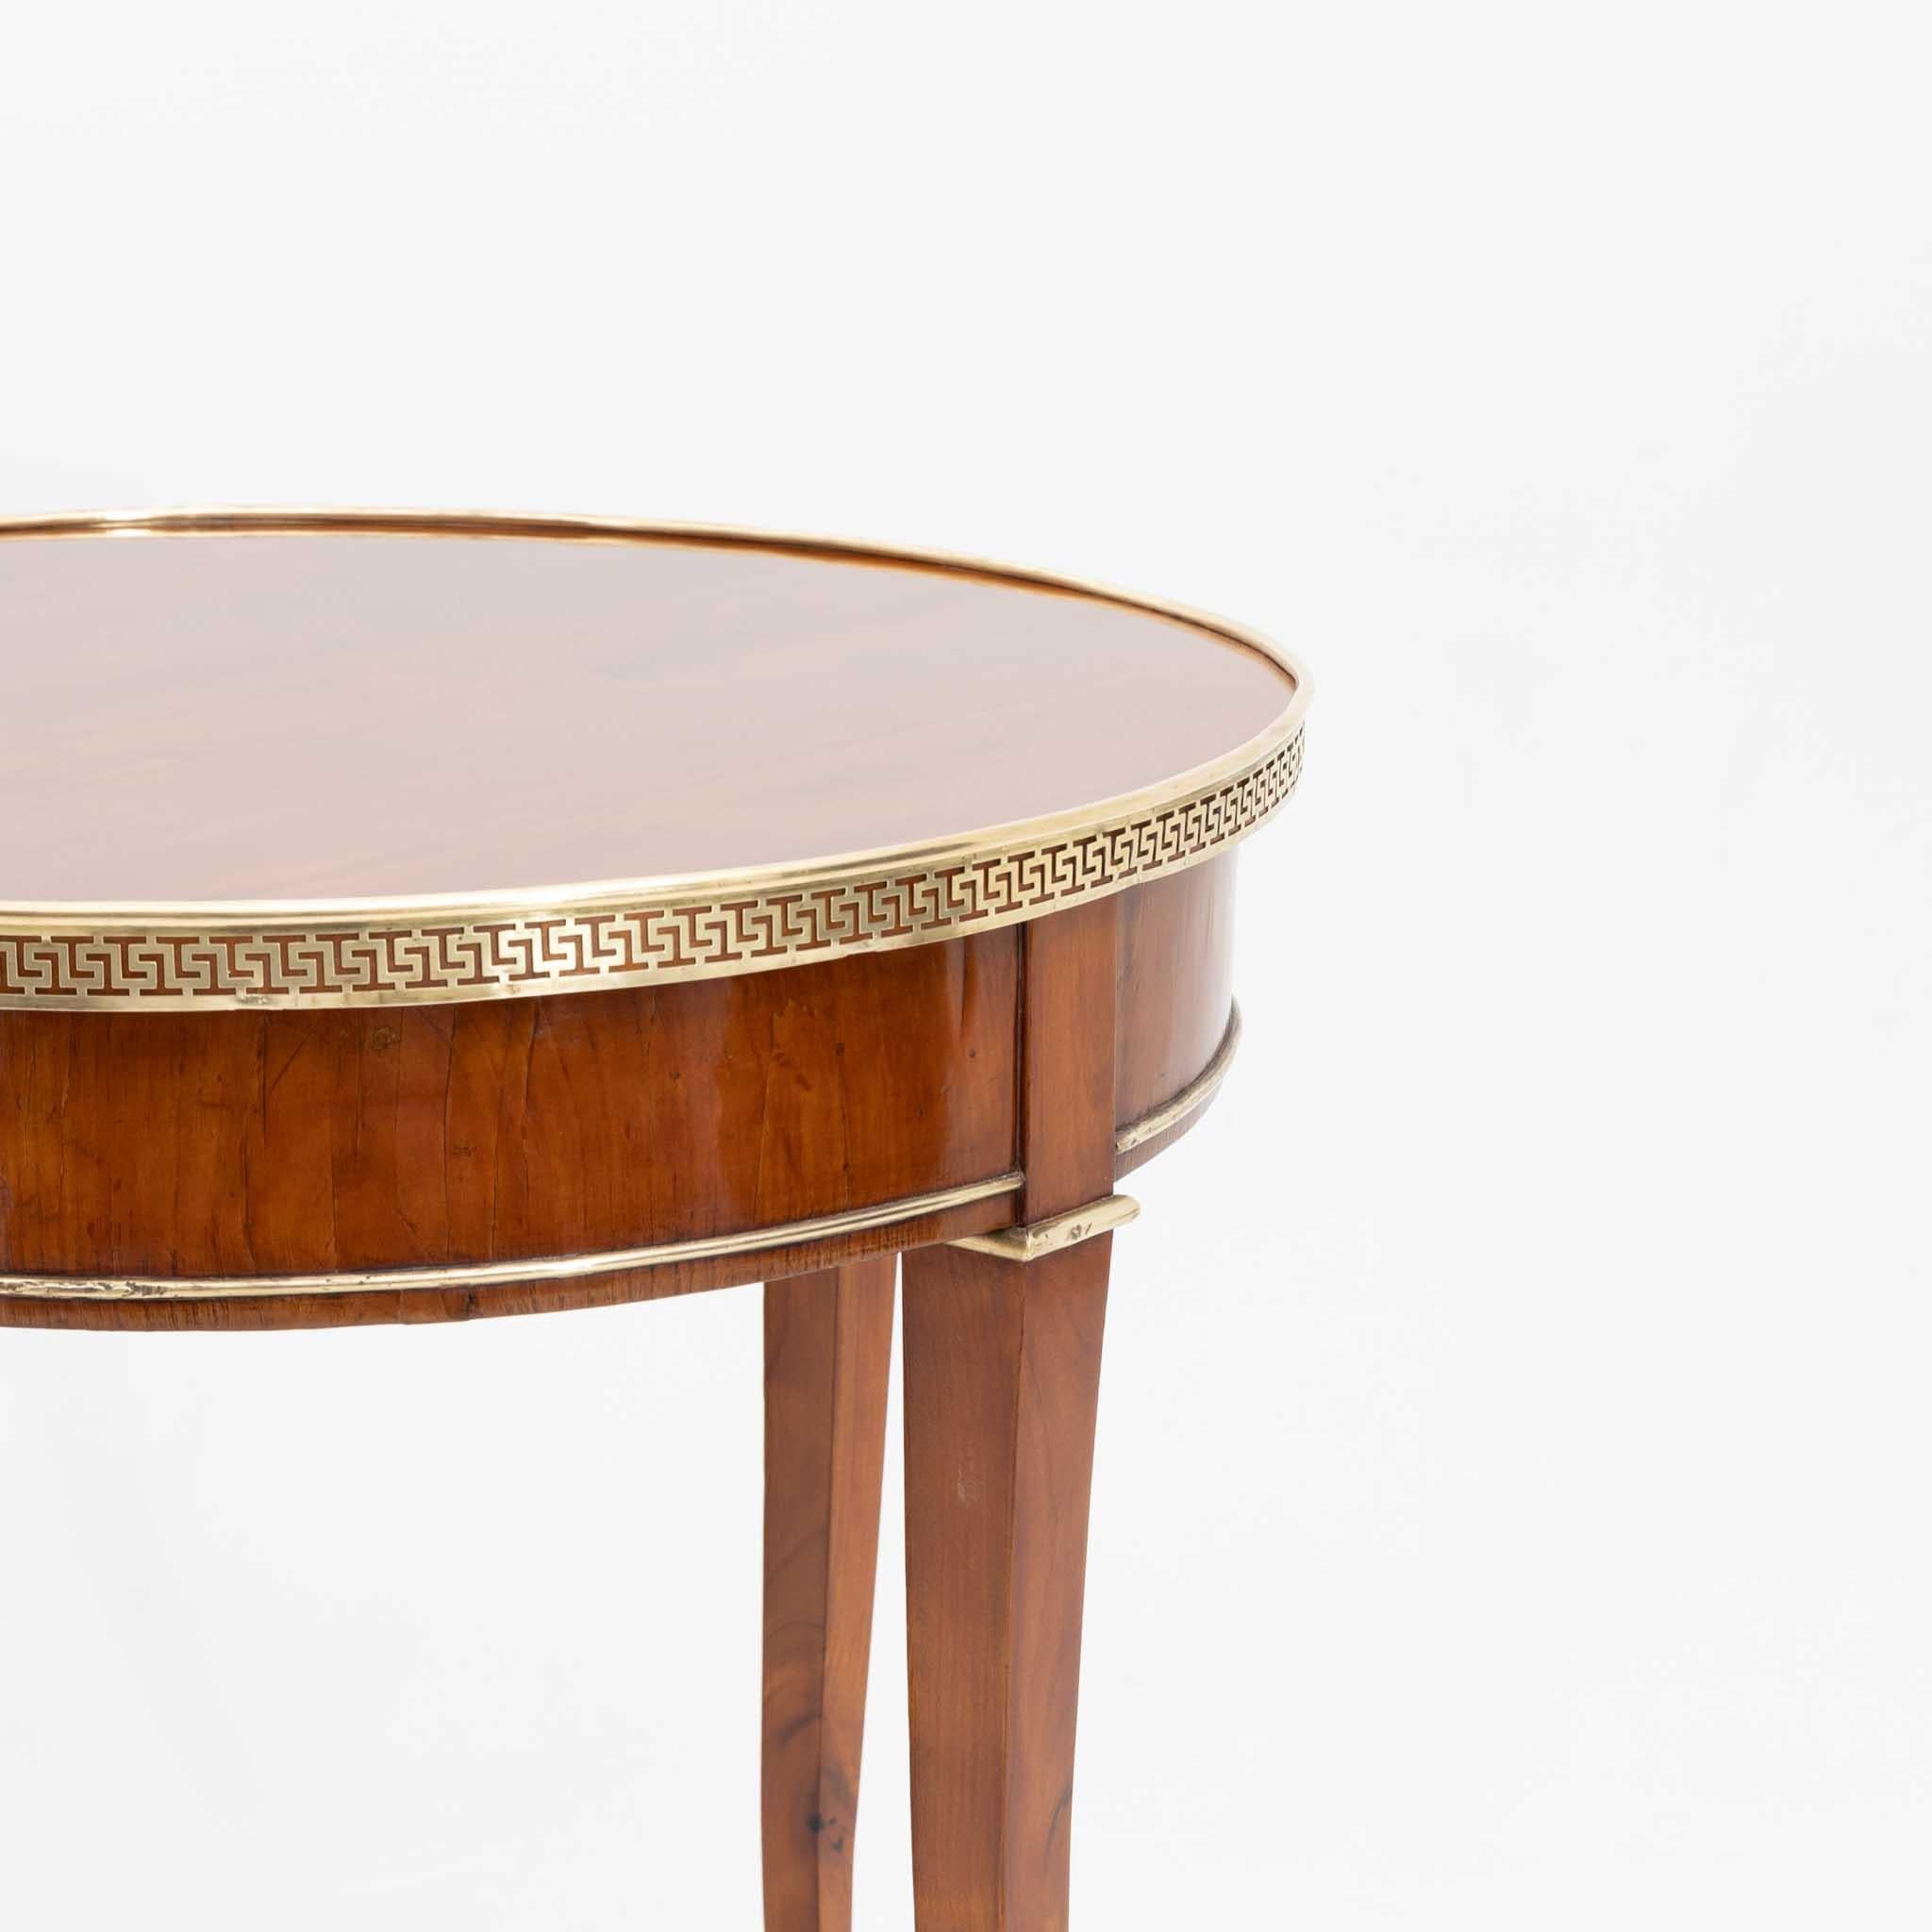 Neoclassical side table in cherry with surrounding brass strip in the form of a meander band and slightly curved square-pointed feet.